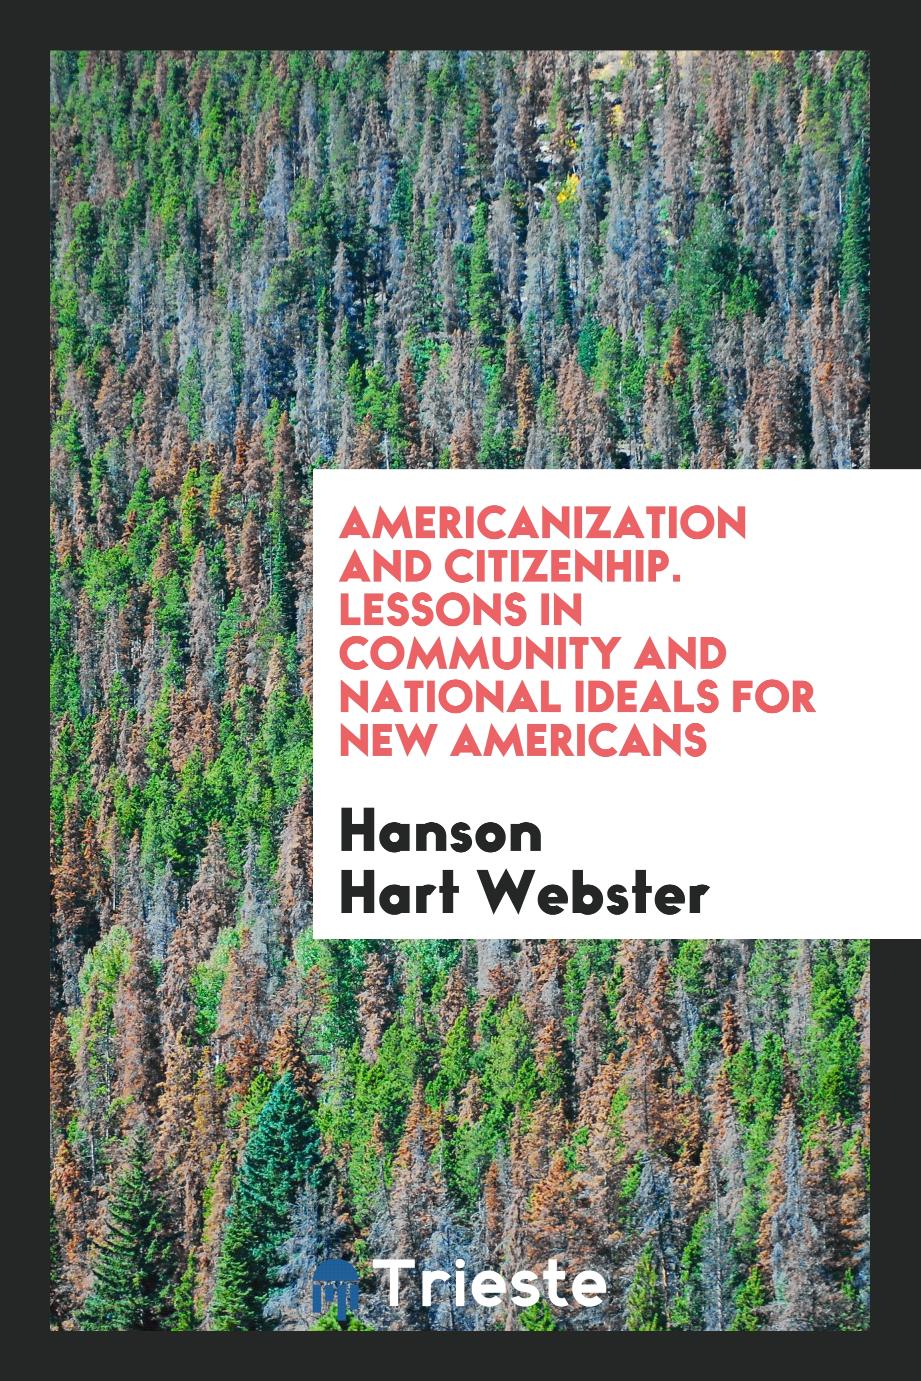 Americanization and Citizenhip. Lessons in Community and National Ideals for New Americans